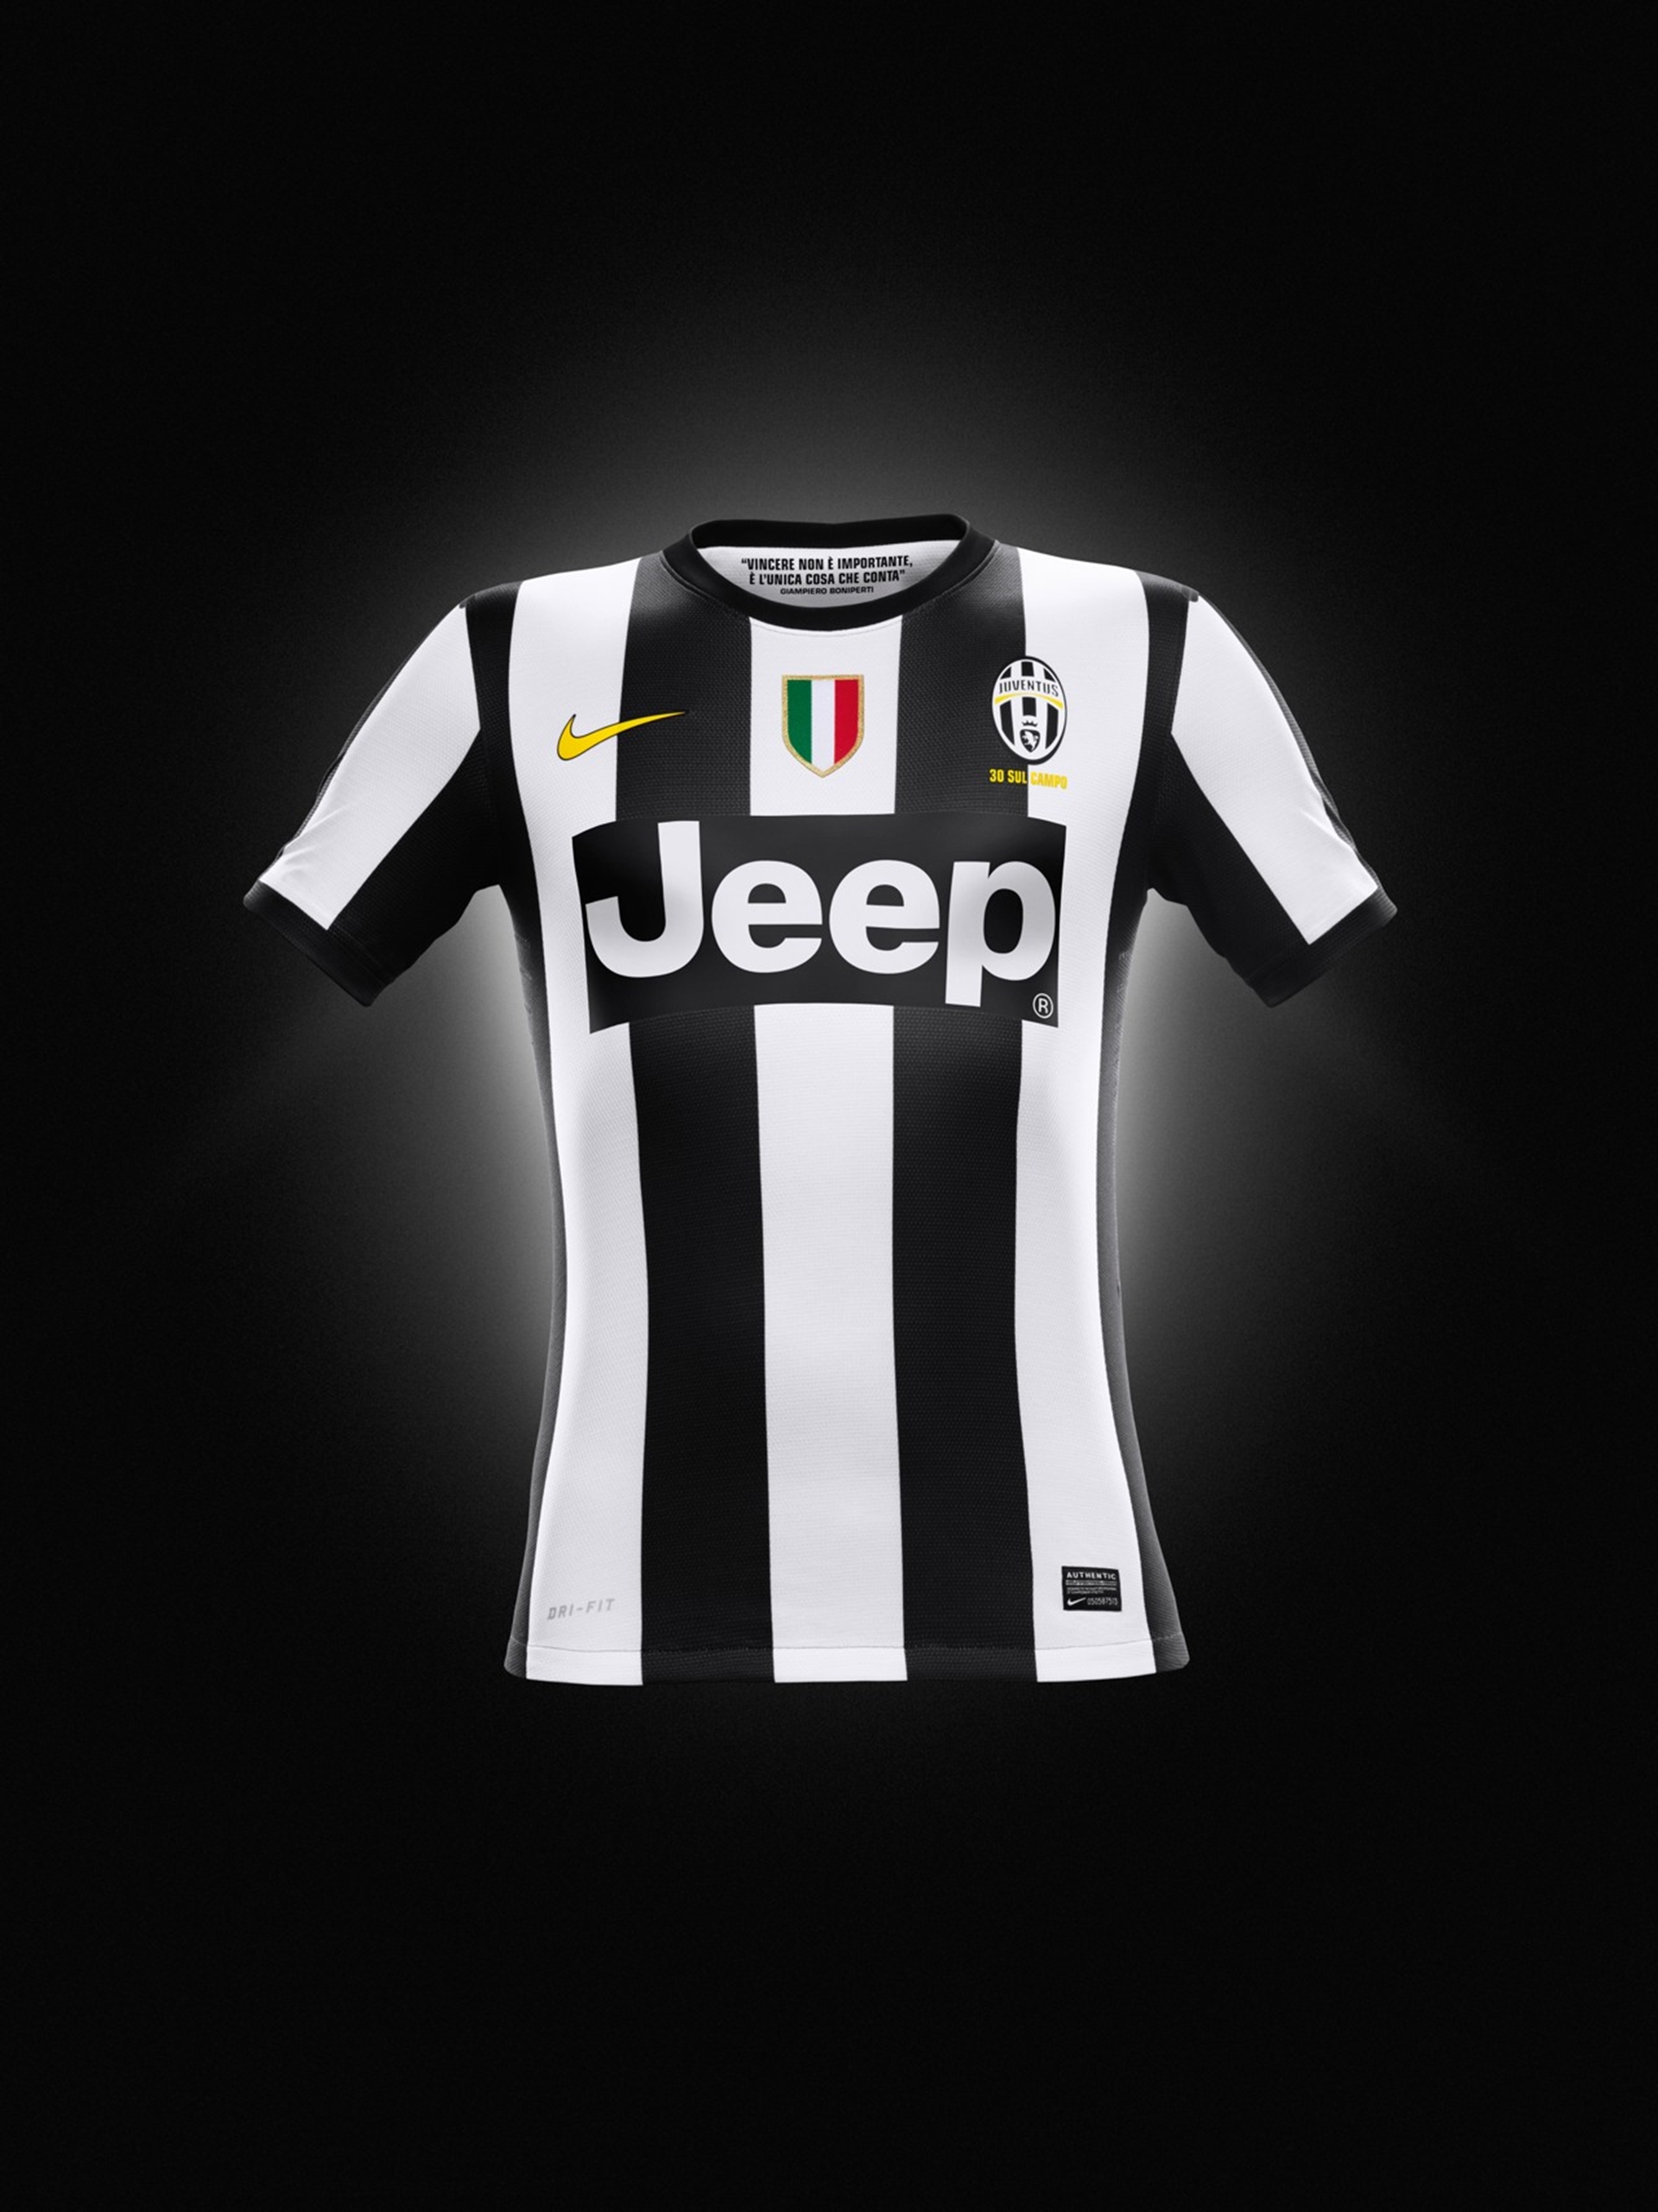 The Jeep® Brand Debuts on the Juventus Home Jersey